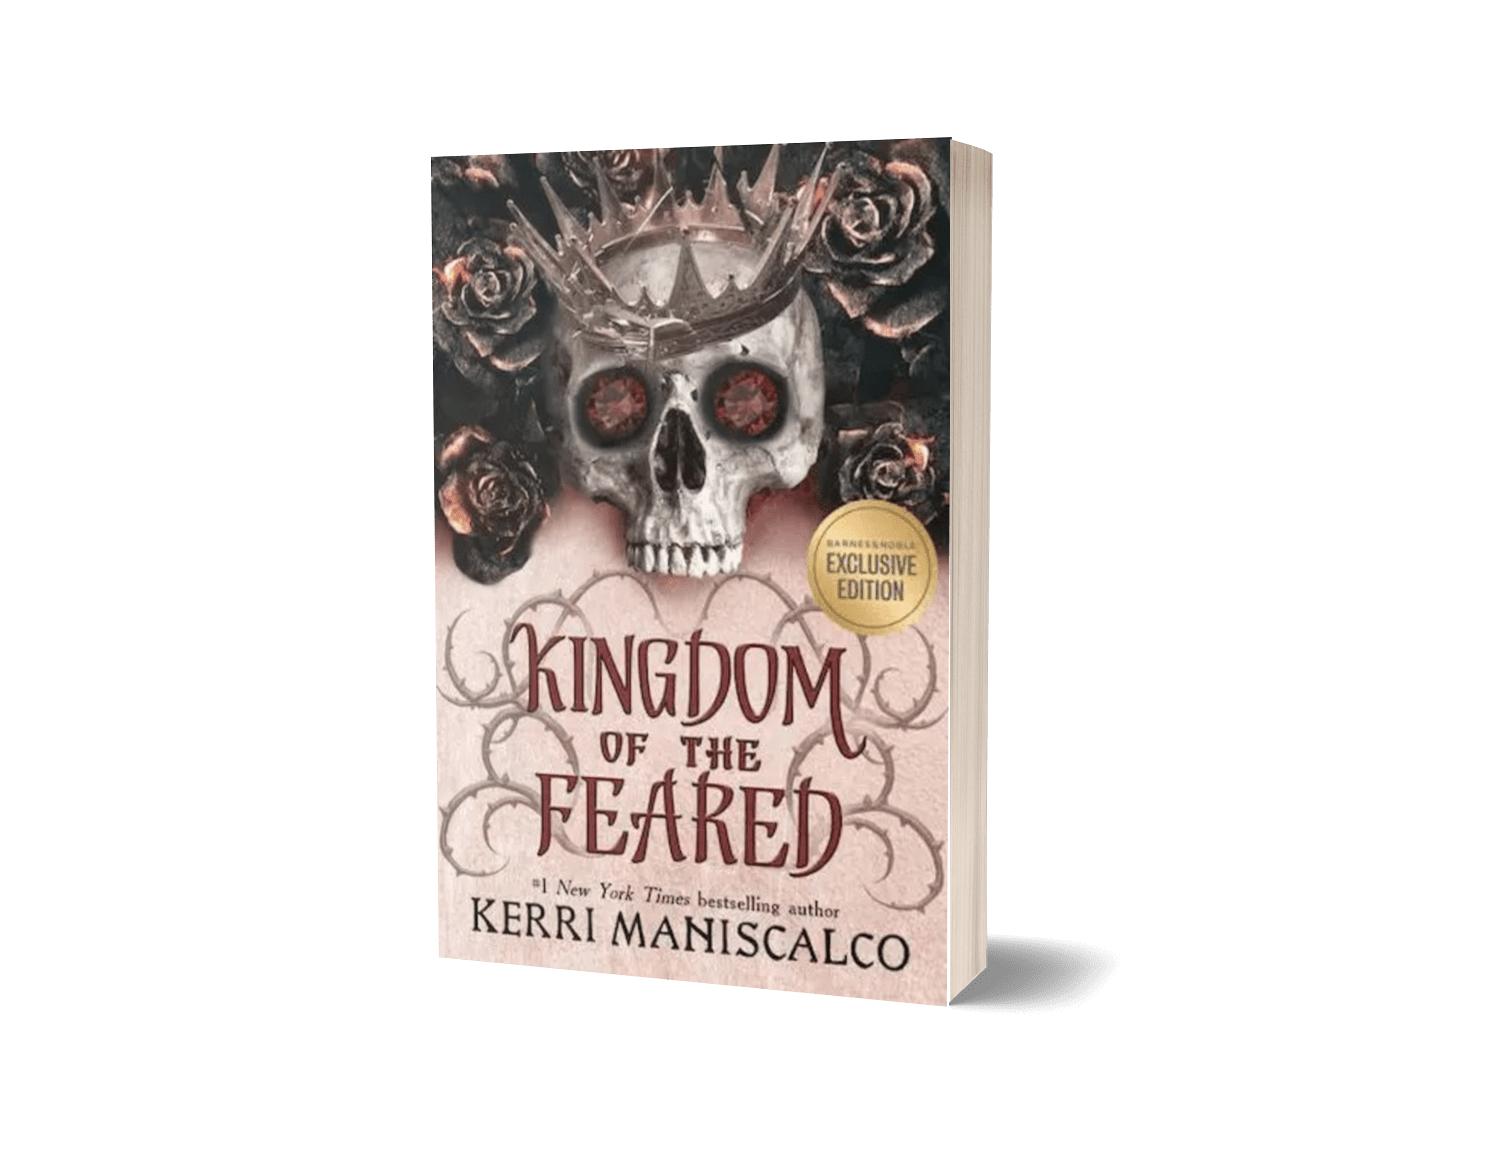 Kingdom of the Feared (Kingdom of the Wicked 3) By Kerri Maniscalco